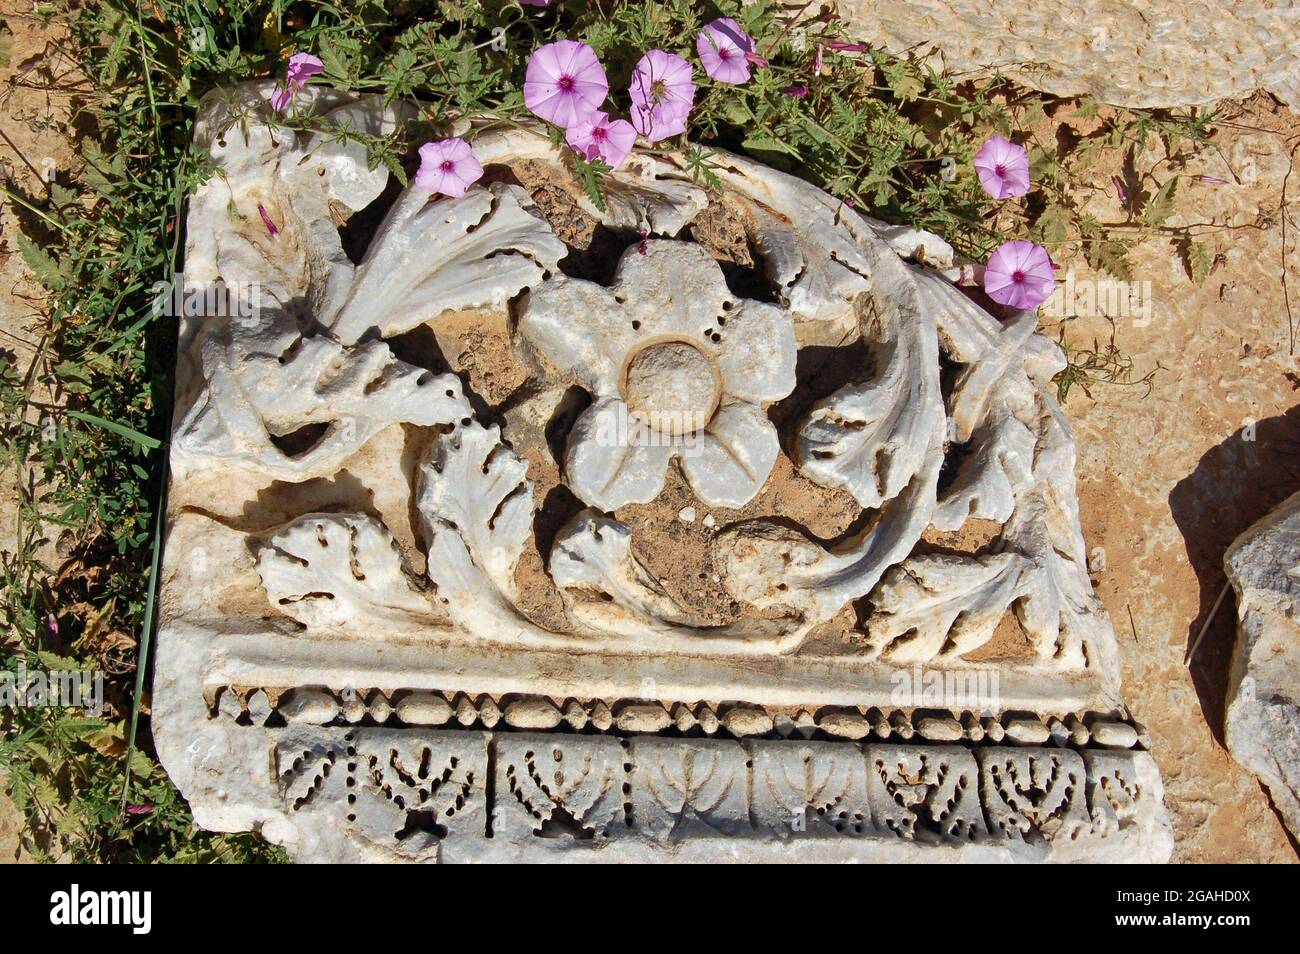 Part of a large carved stone lying on the ground in the Ancient Roman city of Leptis Magna in Northern Libya.  The carving has acanthus leaves trailin Stock Photo